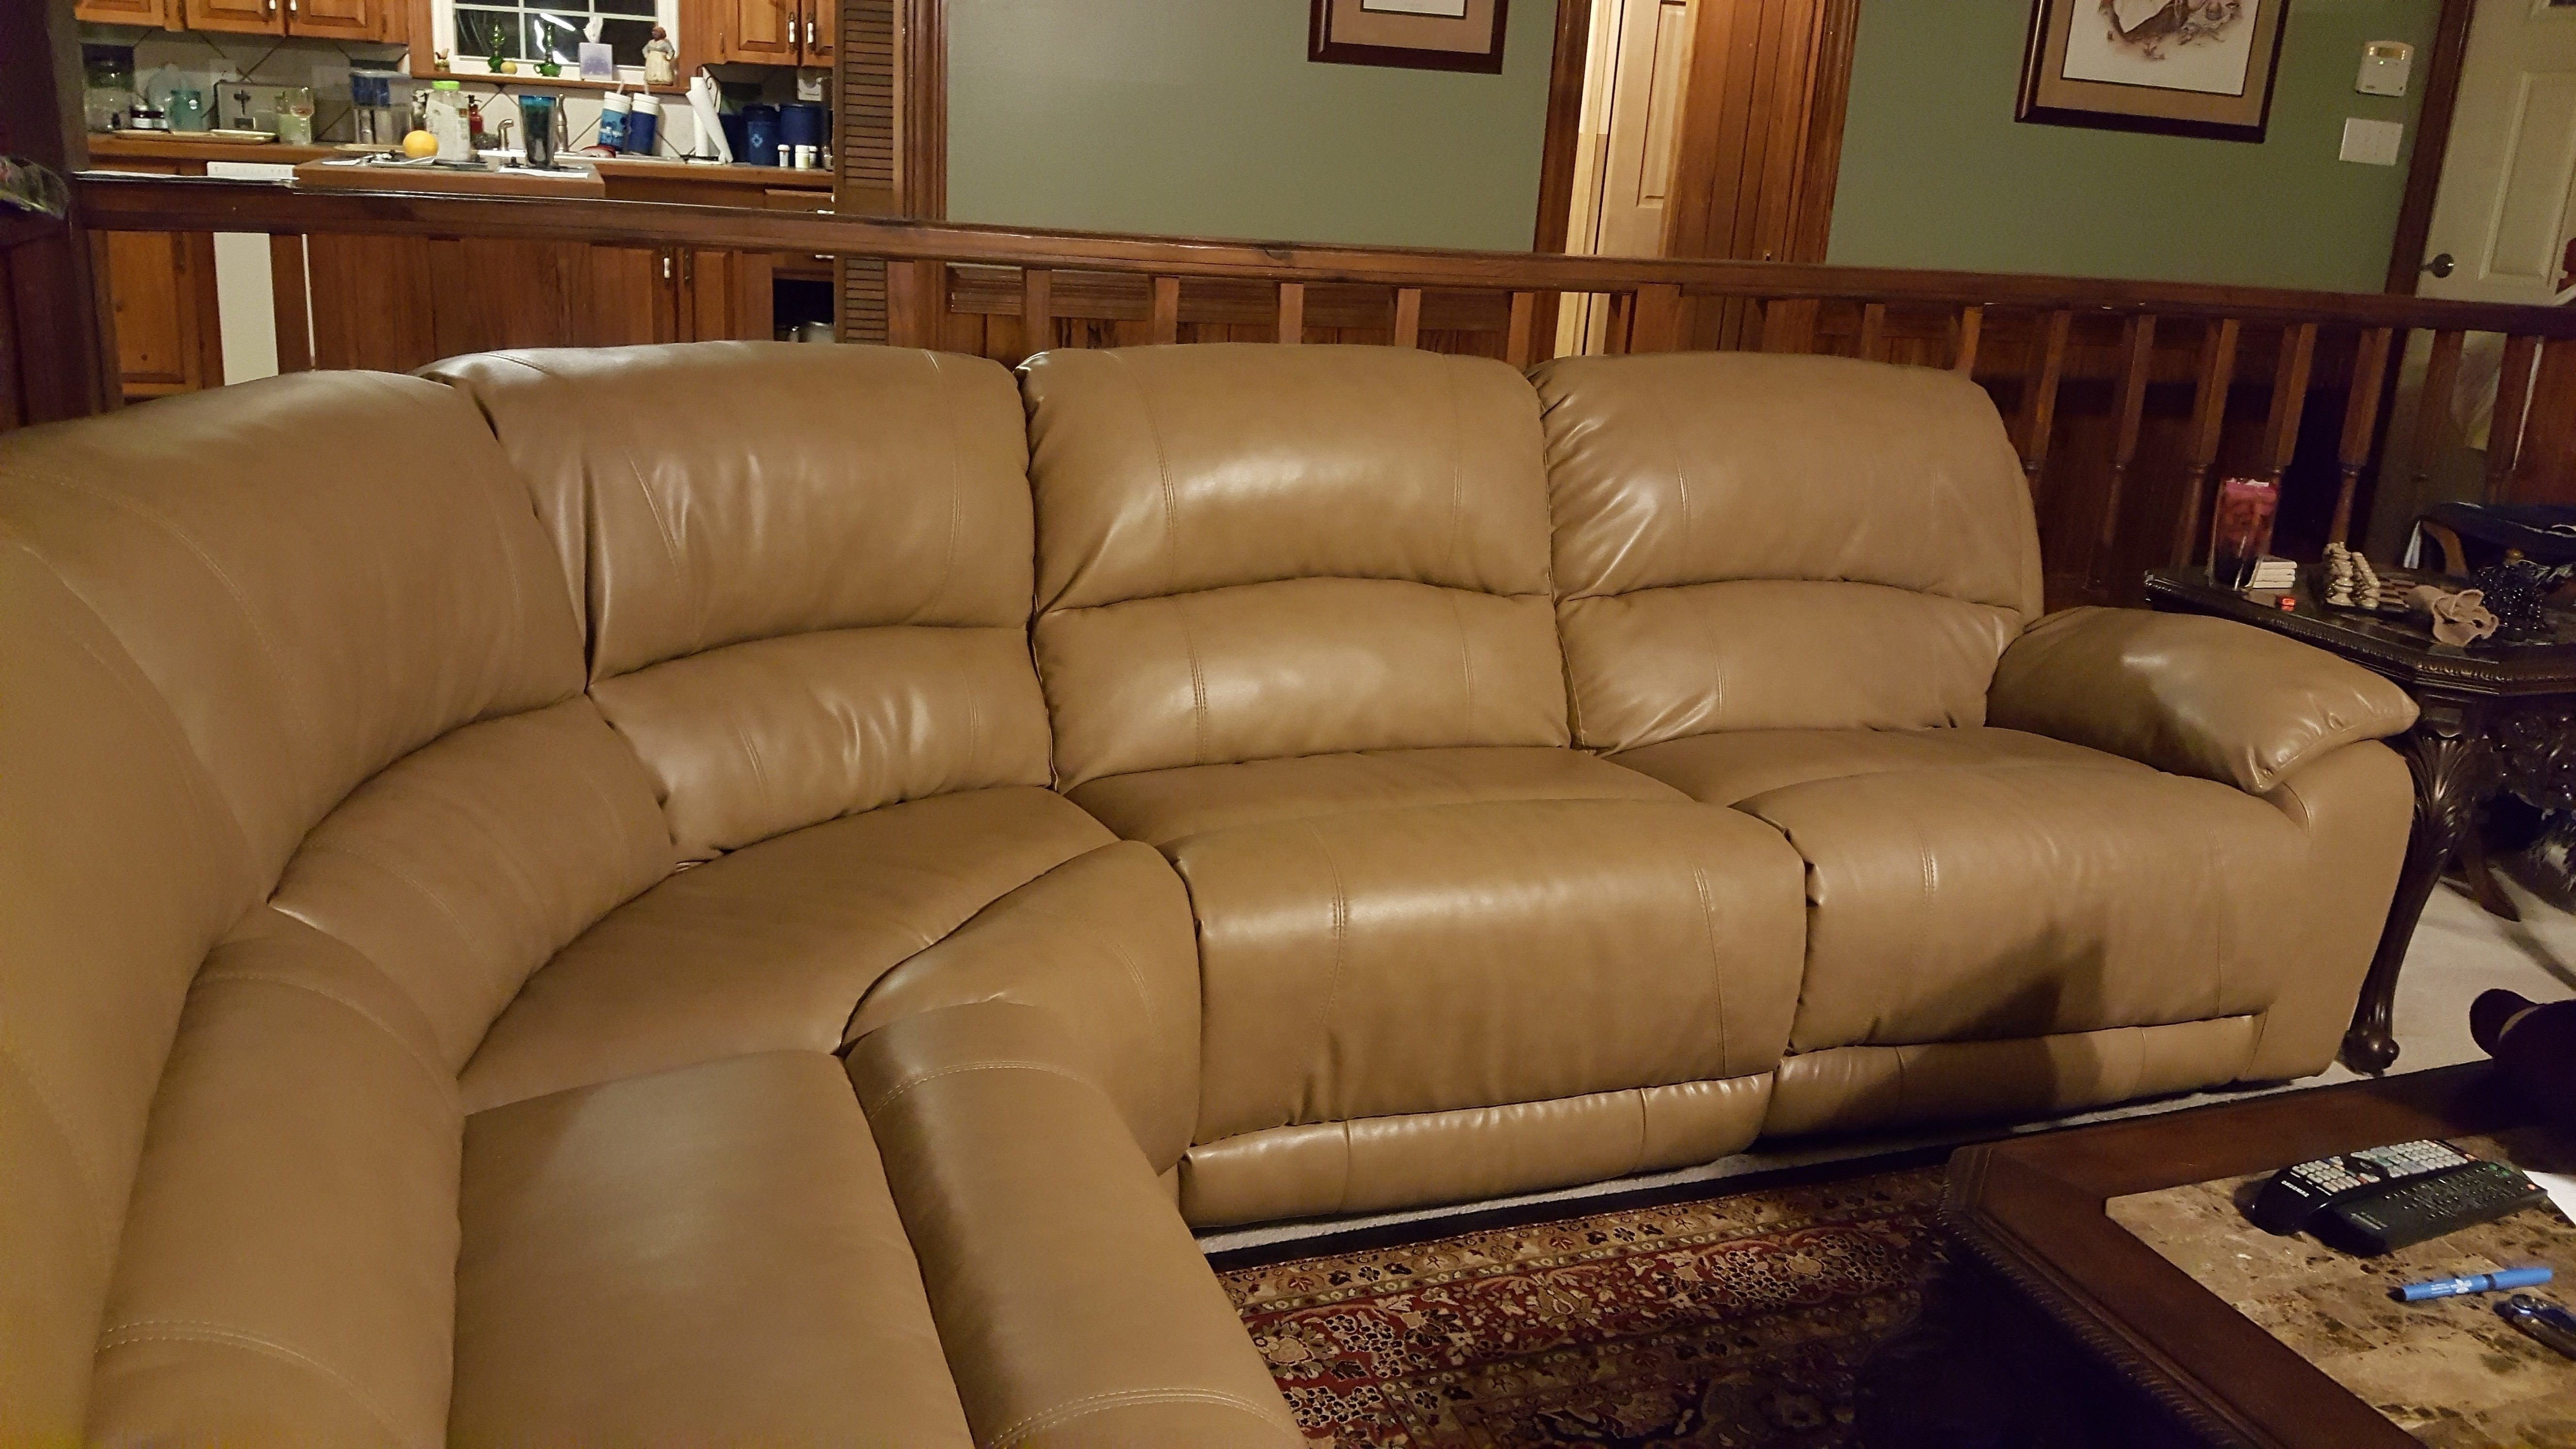 Rooms To Go Couches – Free Online Home Decor – Techhungry For Well Known Sectional Sofas At Rooms To Go (View 10 of 15)